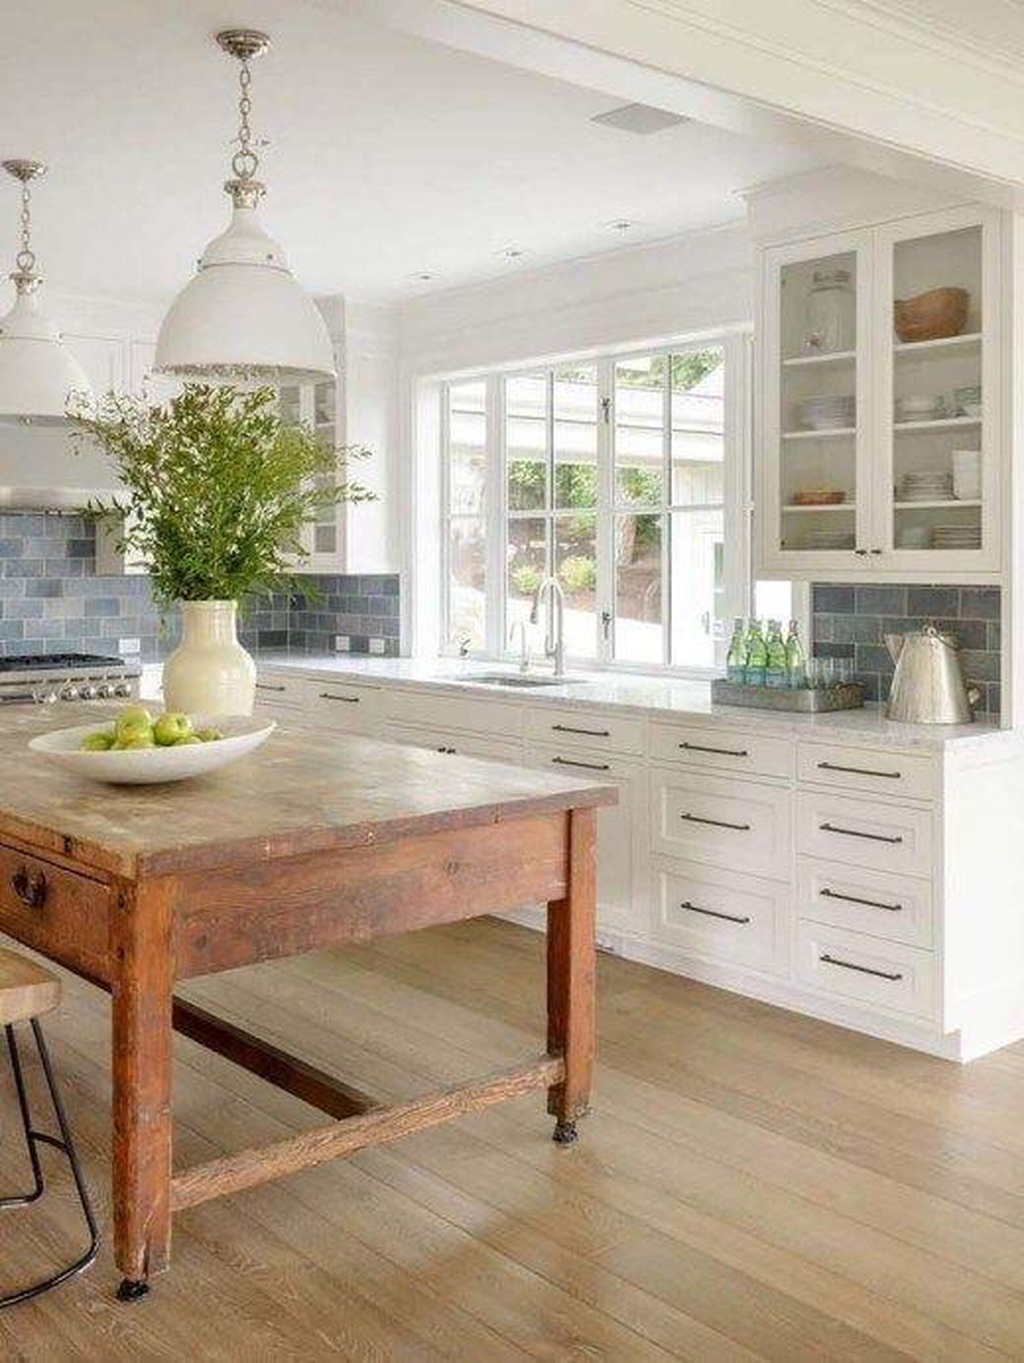 Rustic Farmhouse Kitchen Ideas To Get Traditional Accent 17